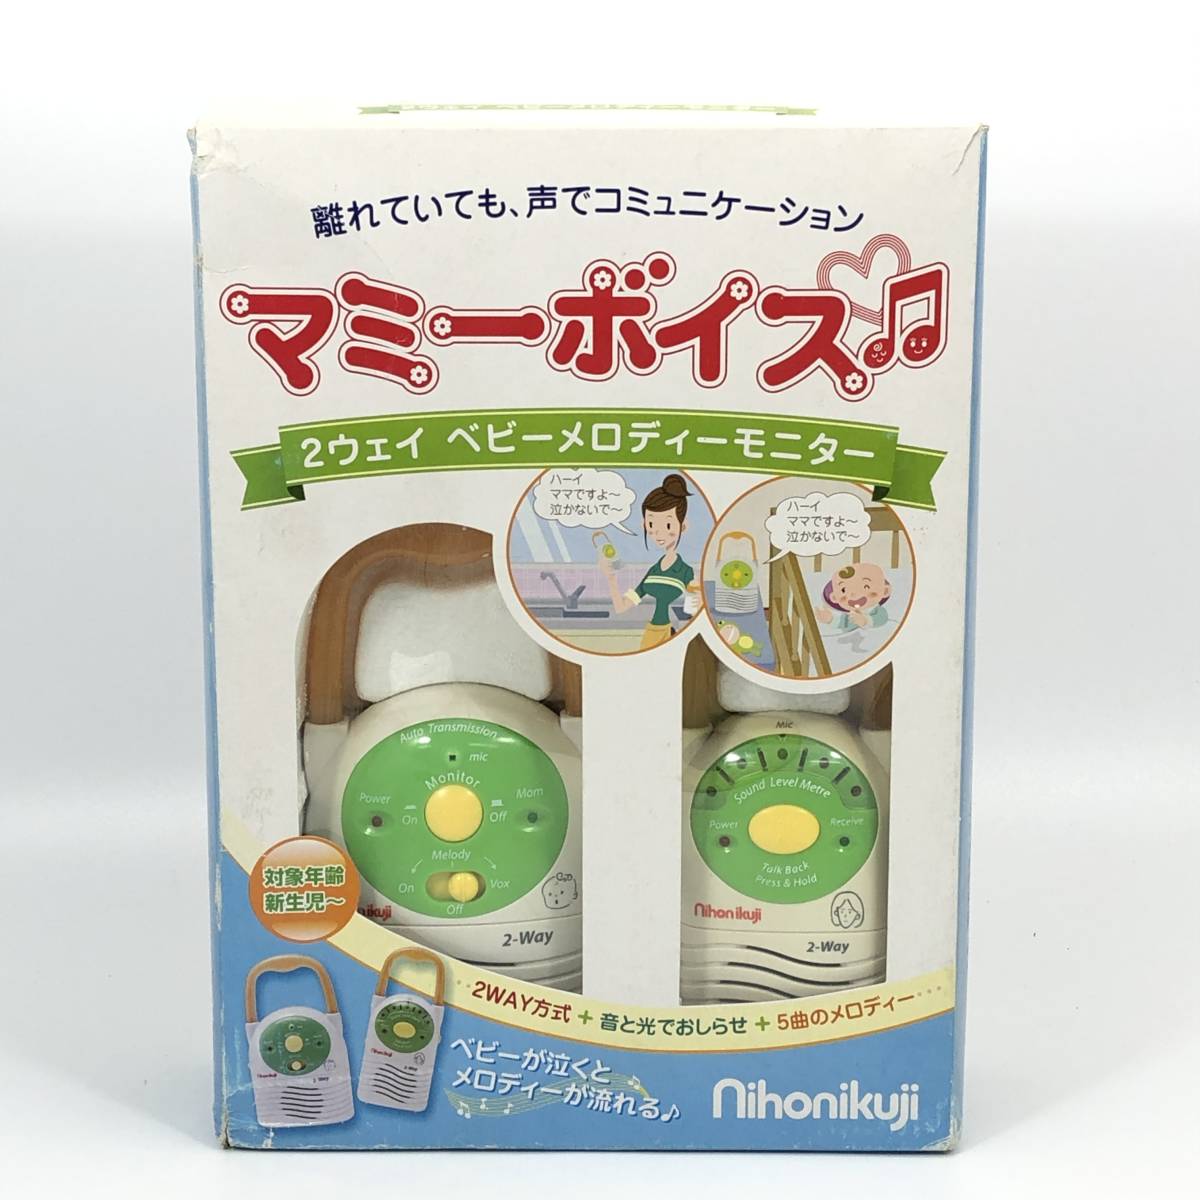  baby melody - monitor mummy voice Japan childcare baby. see protection .